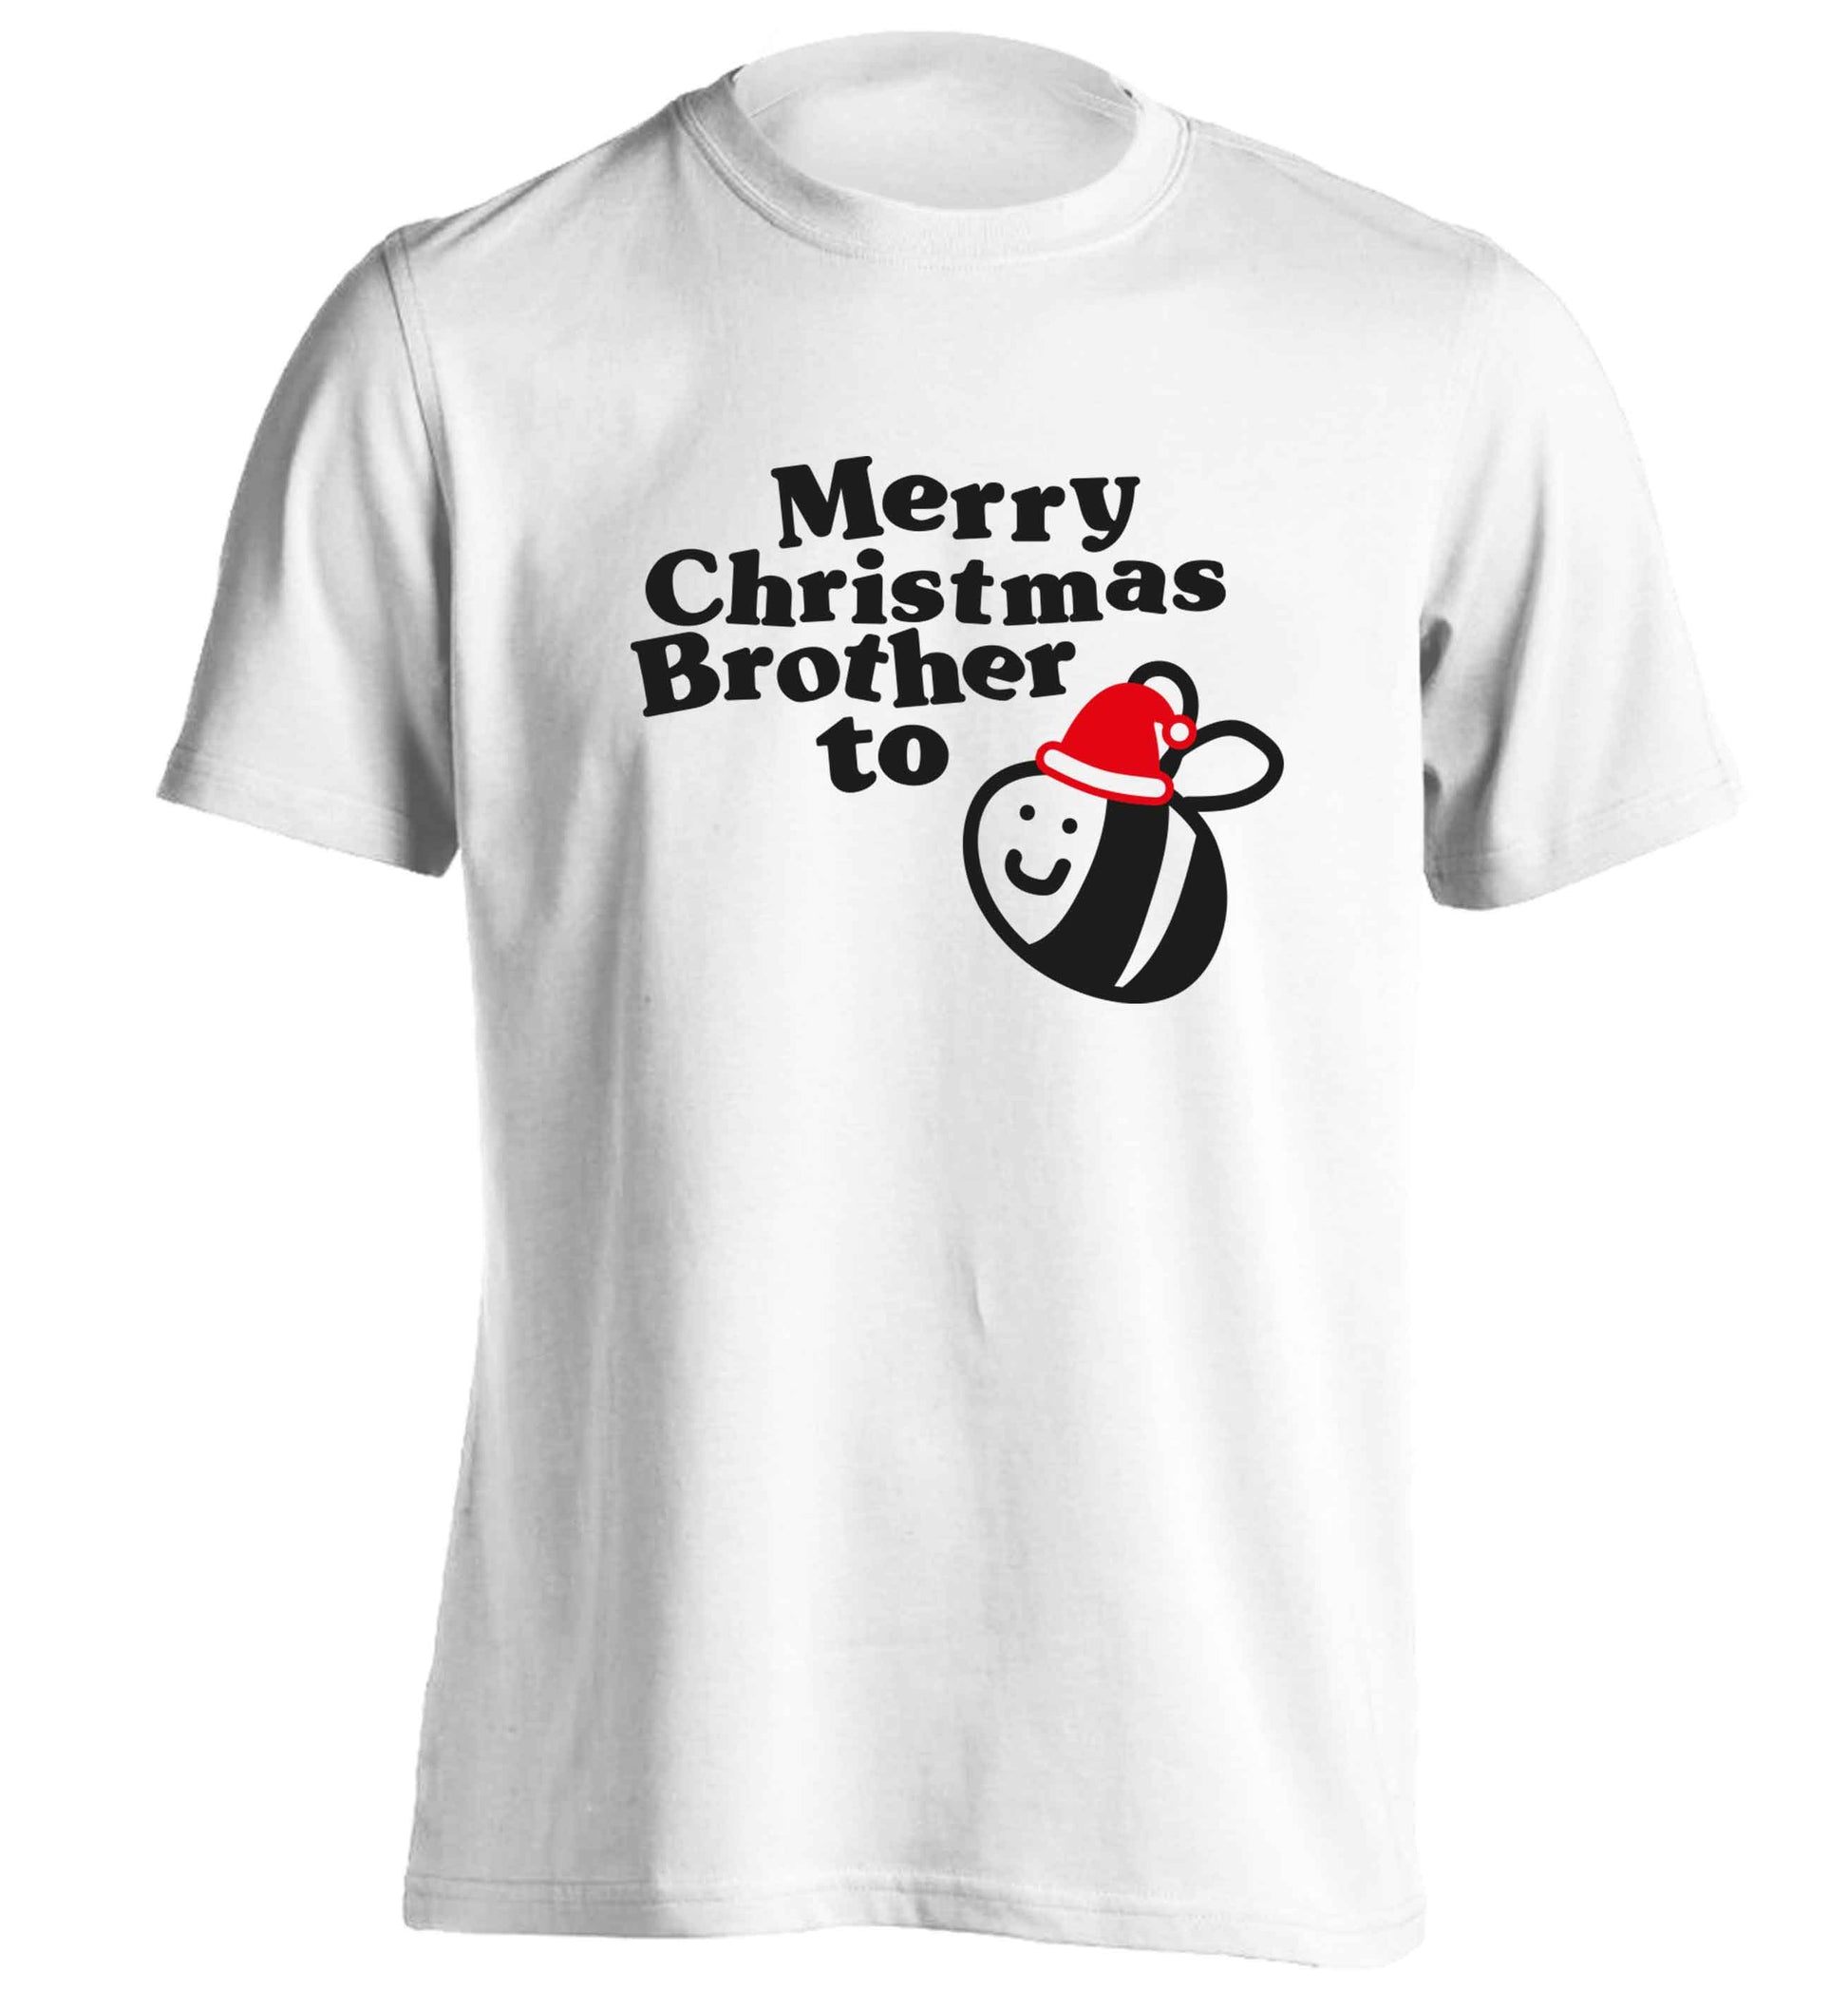 Merry Christmas brother to be adults unisex white Tshirt 2XL